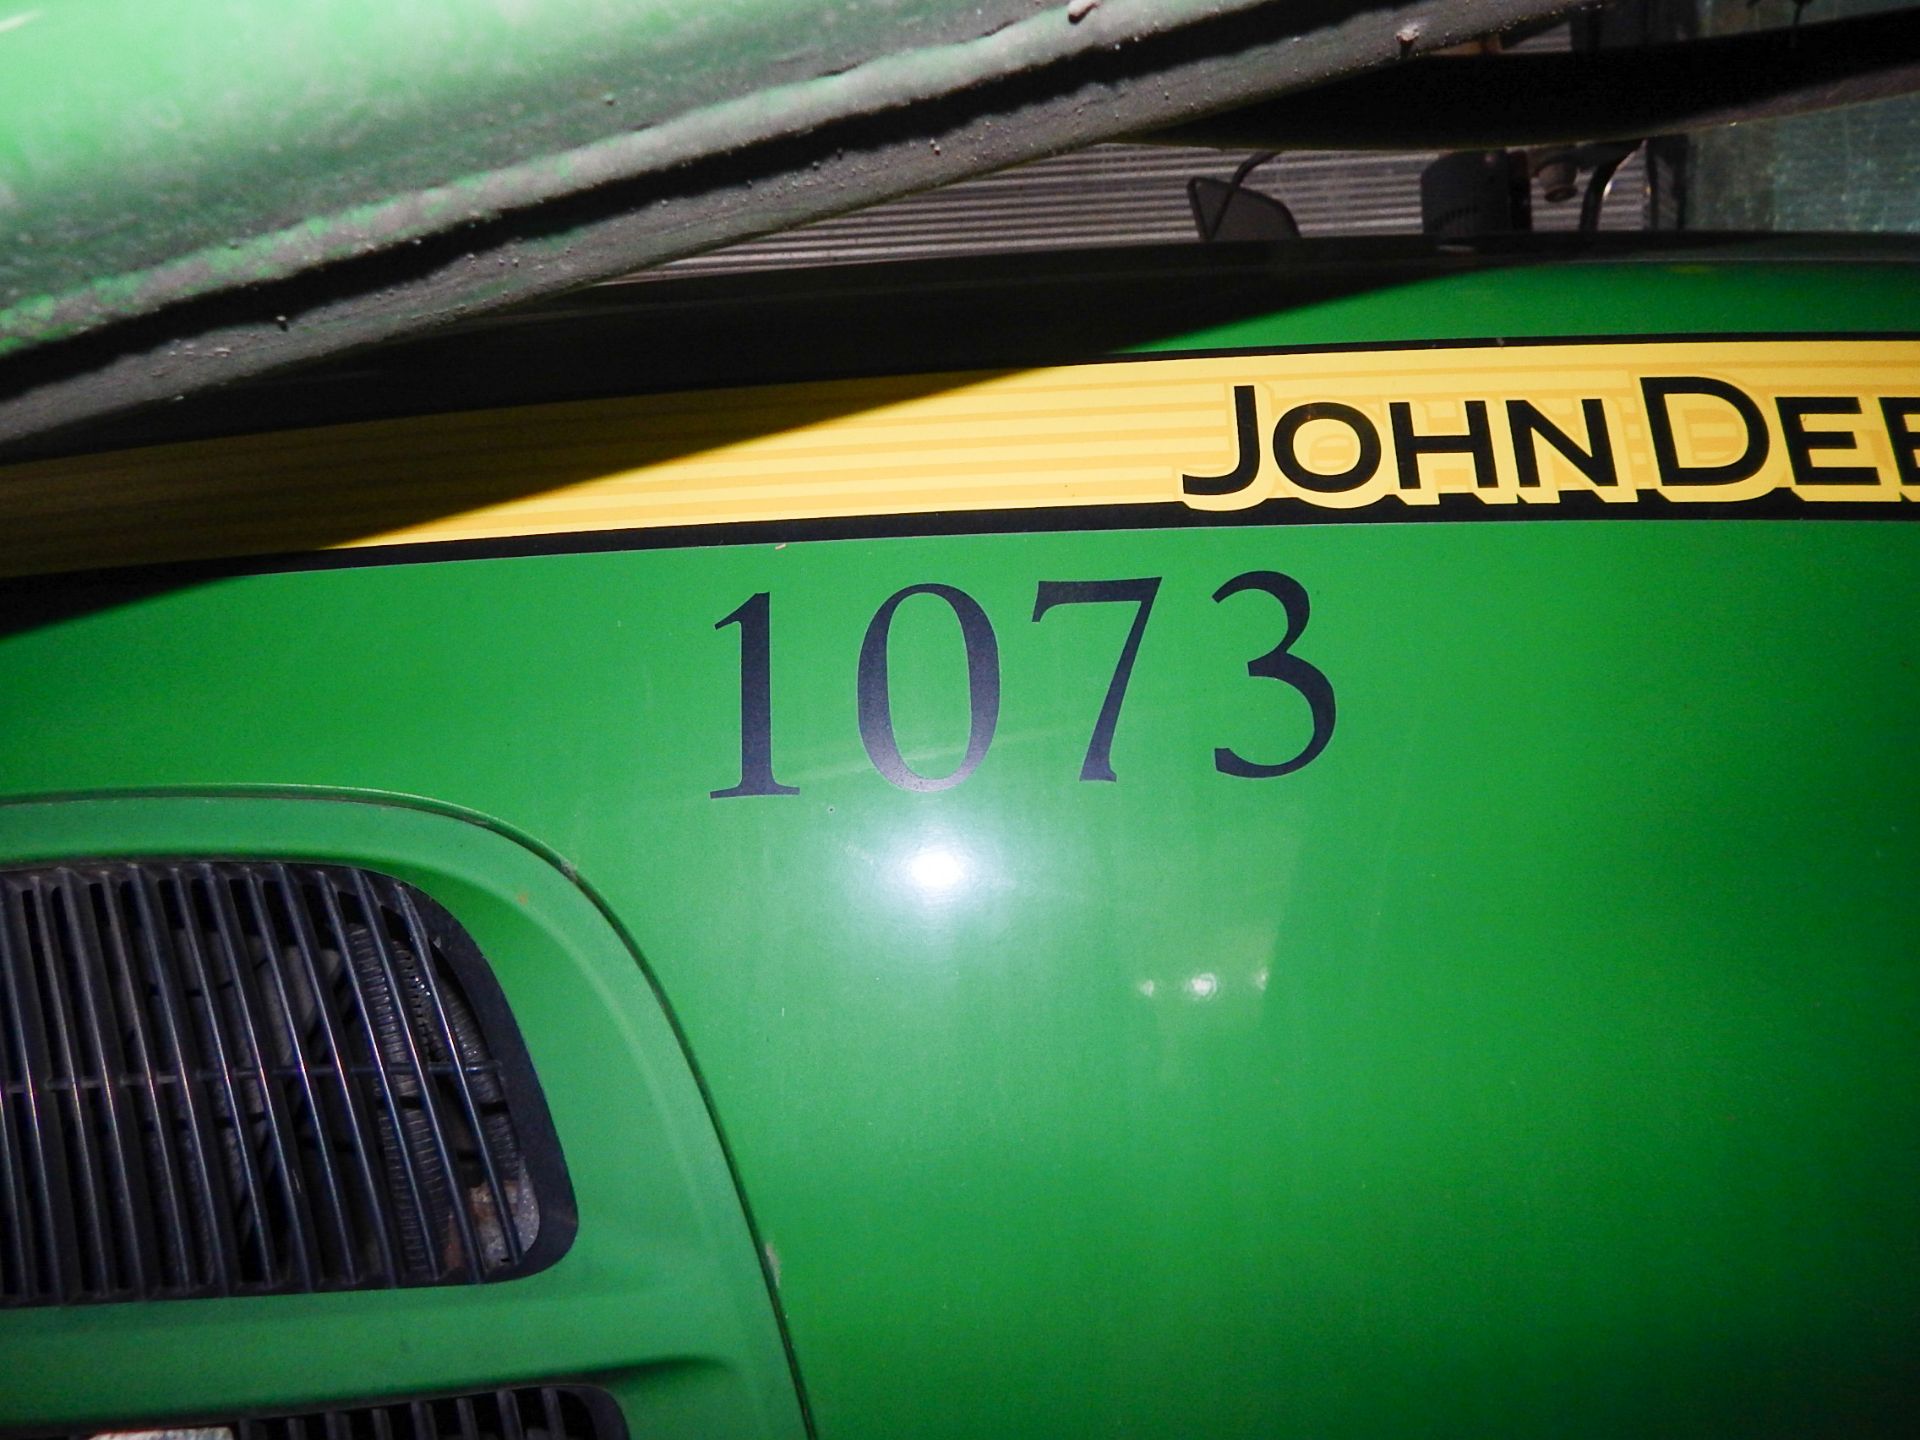 JOHN DEERE (2012) 6430 TRACTOR WITH JD 4.5L ENGINE, 4WD, JOHN DEERE H340 HYDRAULIC LOADER - Image 8 of 11